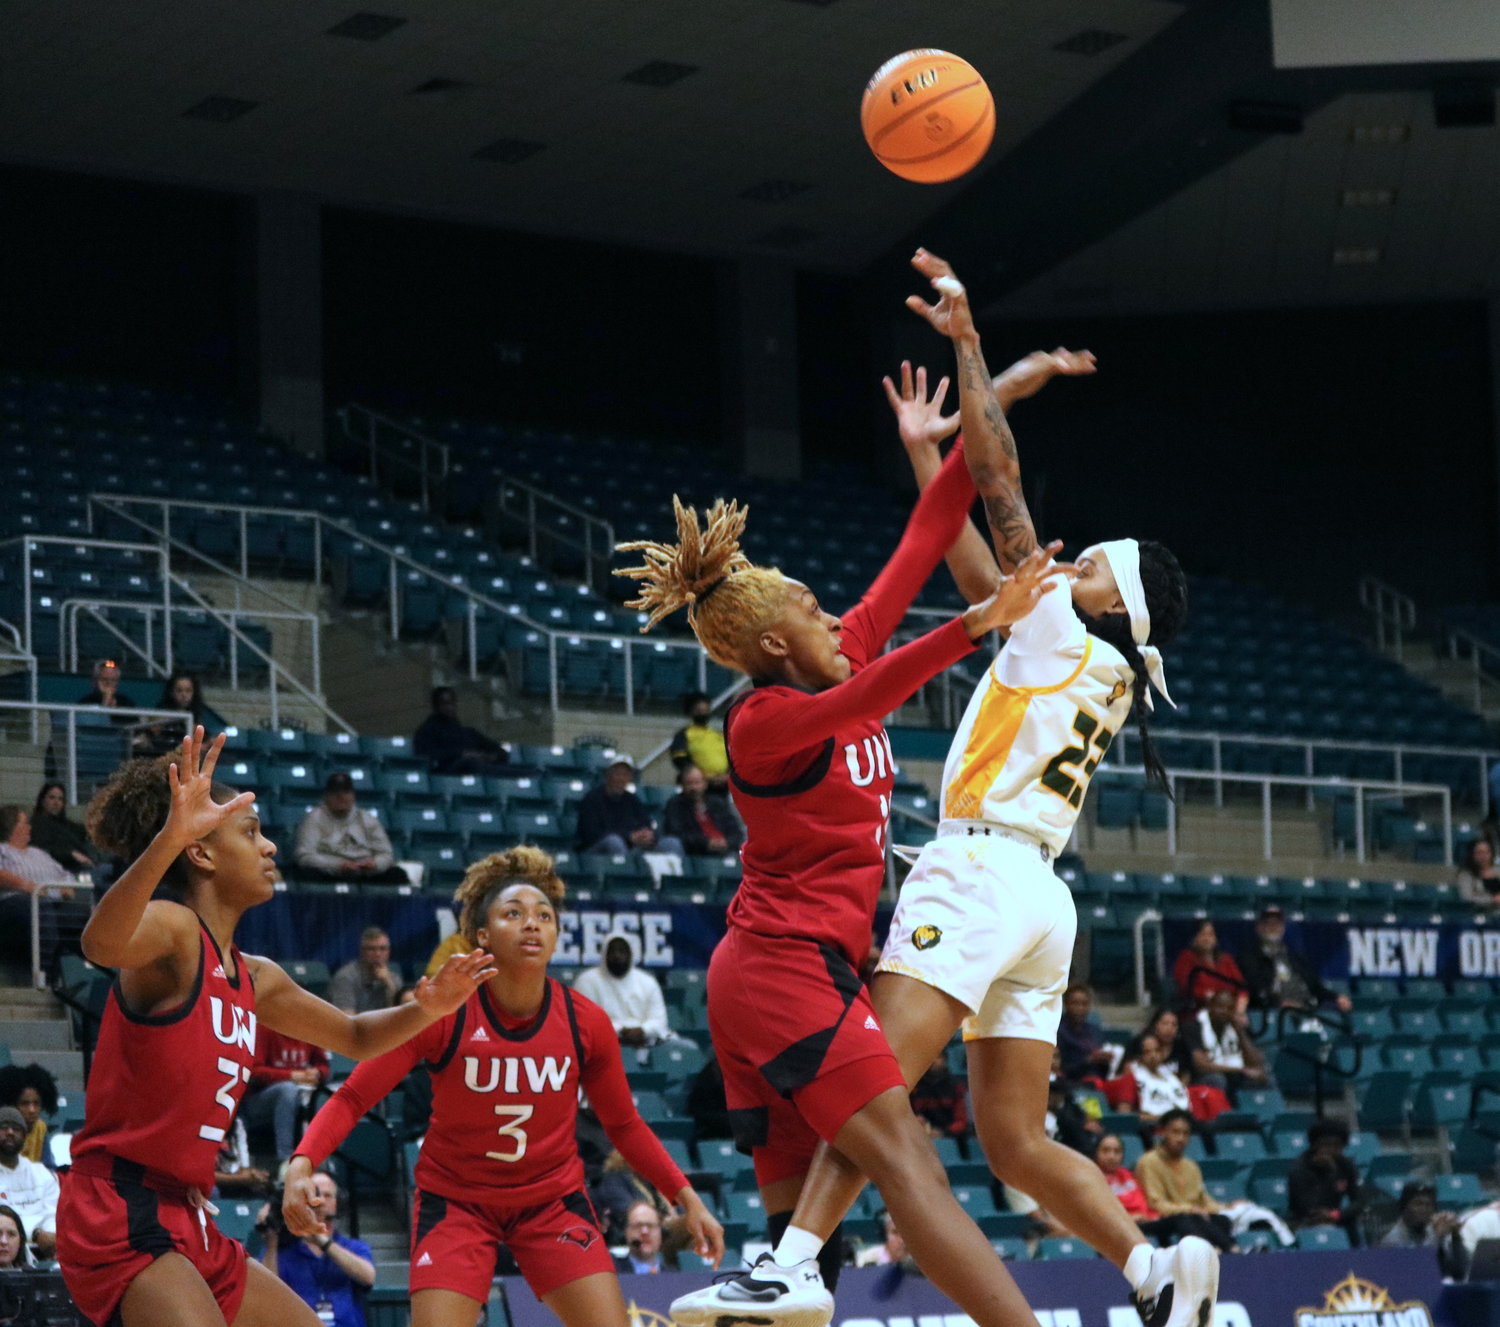 Breonca Ducksworth’s shot is blocked during Sunday’s Southland Tournament Final at the Merrell Center between the University of Incarnate Word and Southeastern Louisiana.